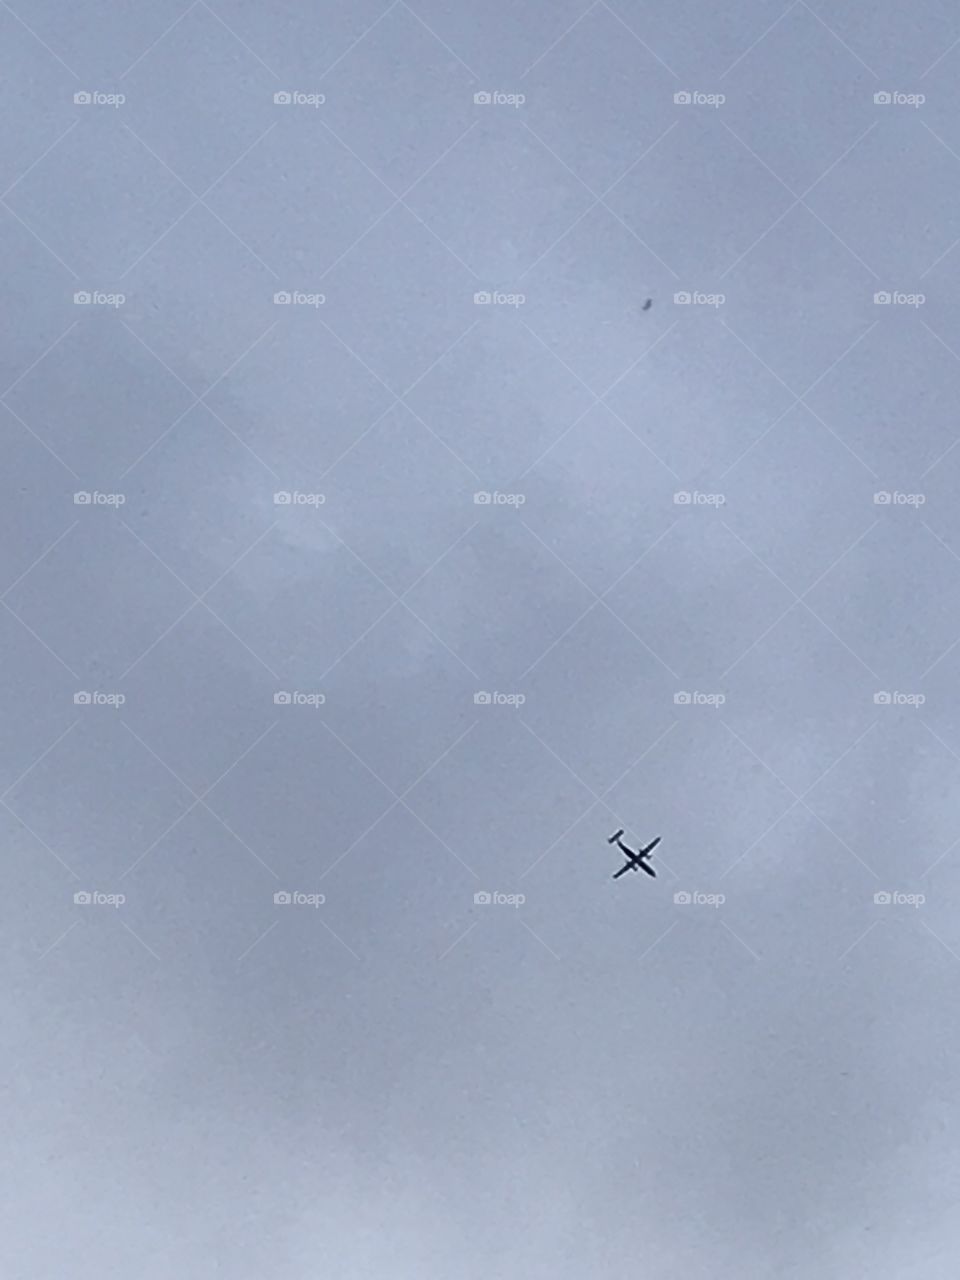 A Dash 8 q300 flying over in the foggy, grey skies. This turbo prop is owned by Widerøe (Widerøe) and is green and white.